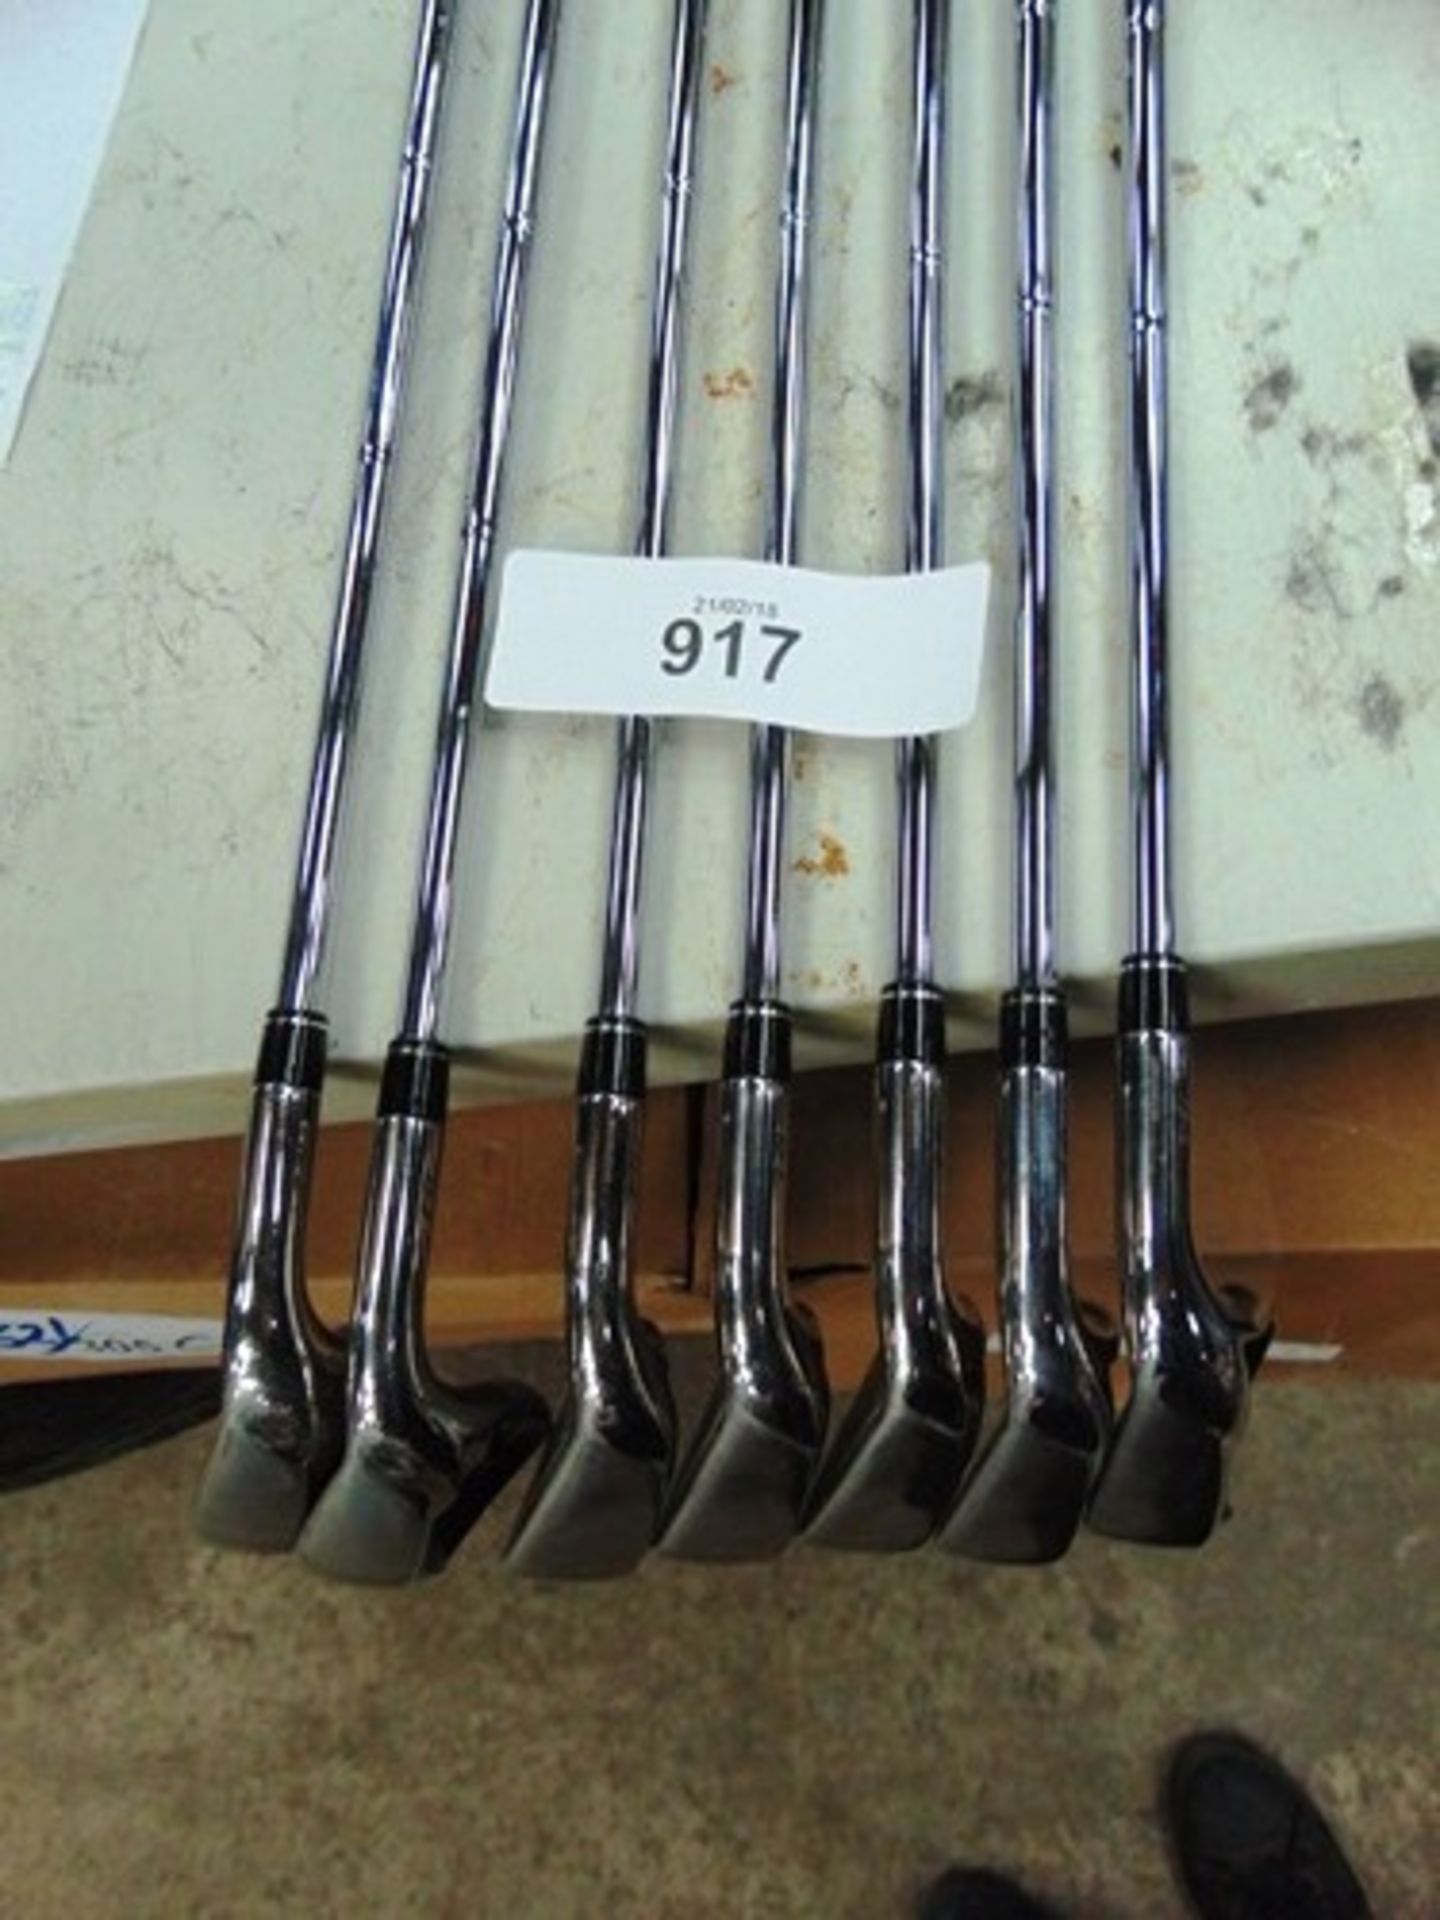 A set of Taylormade Aero Burner golf clubs no's 5 - 9, together with a matching pitch iron and - Image 2 of 4